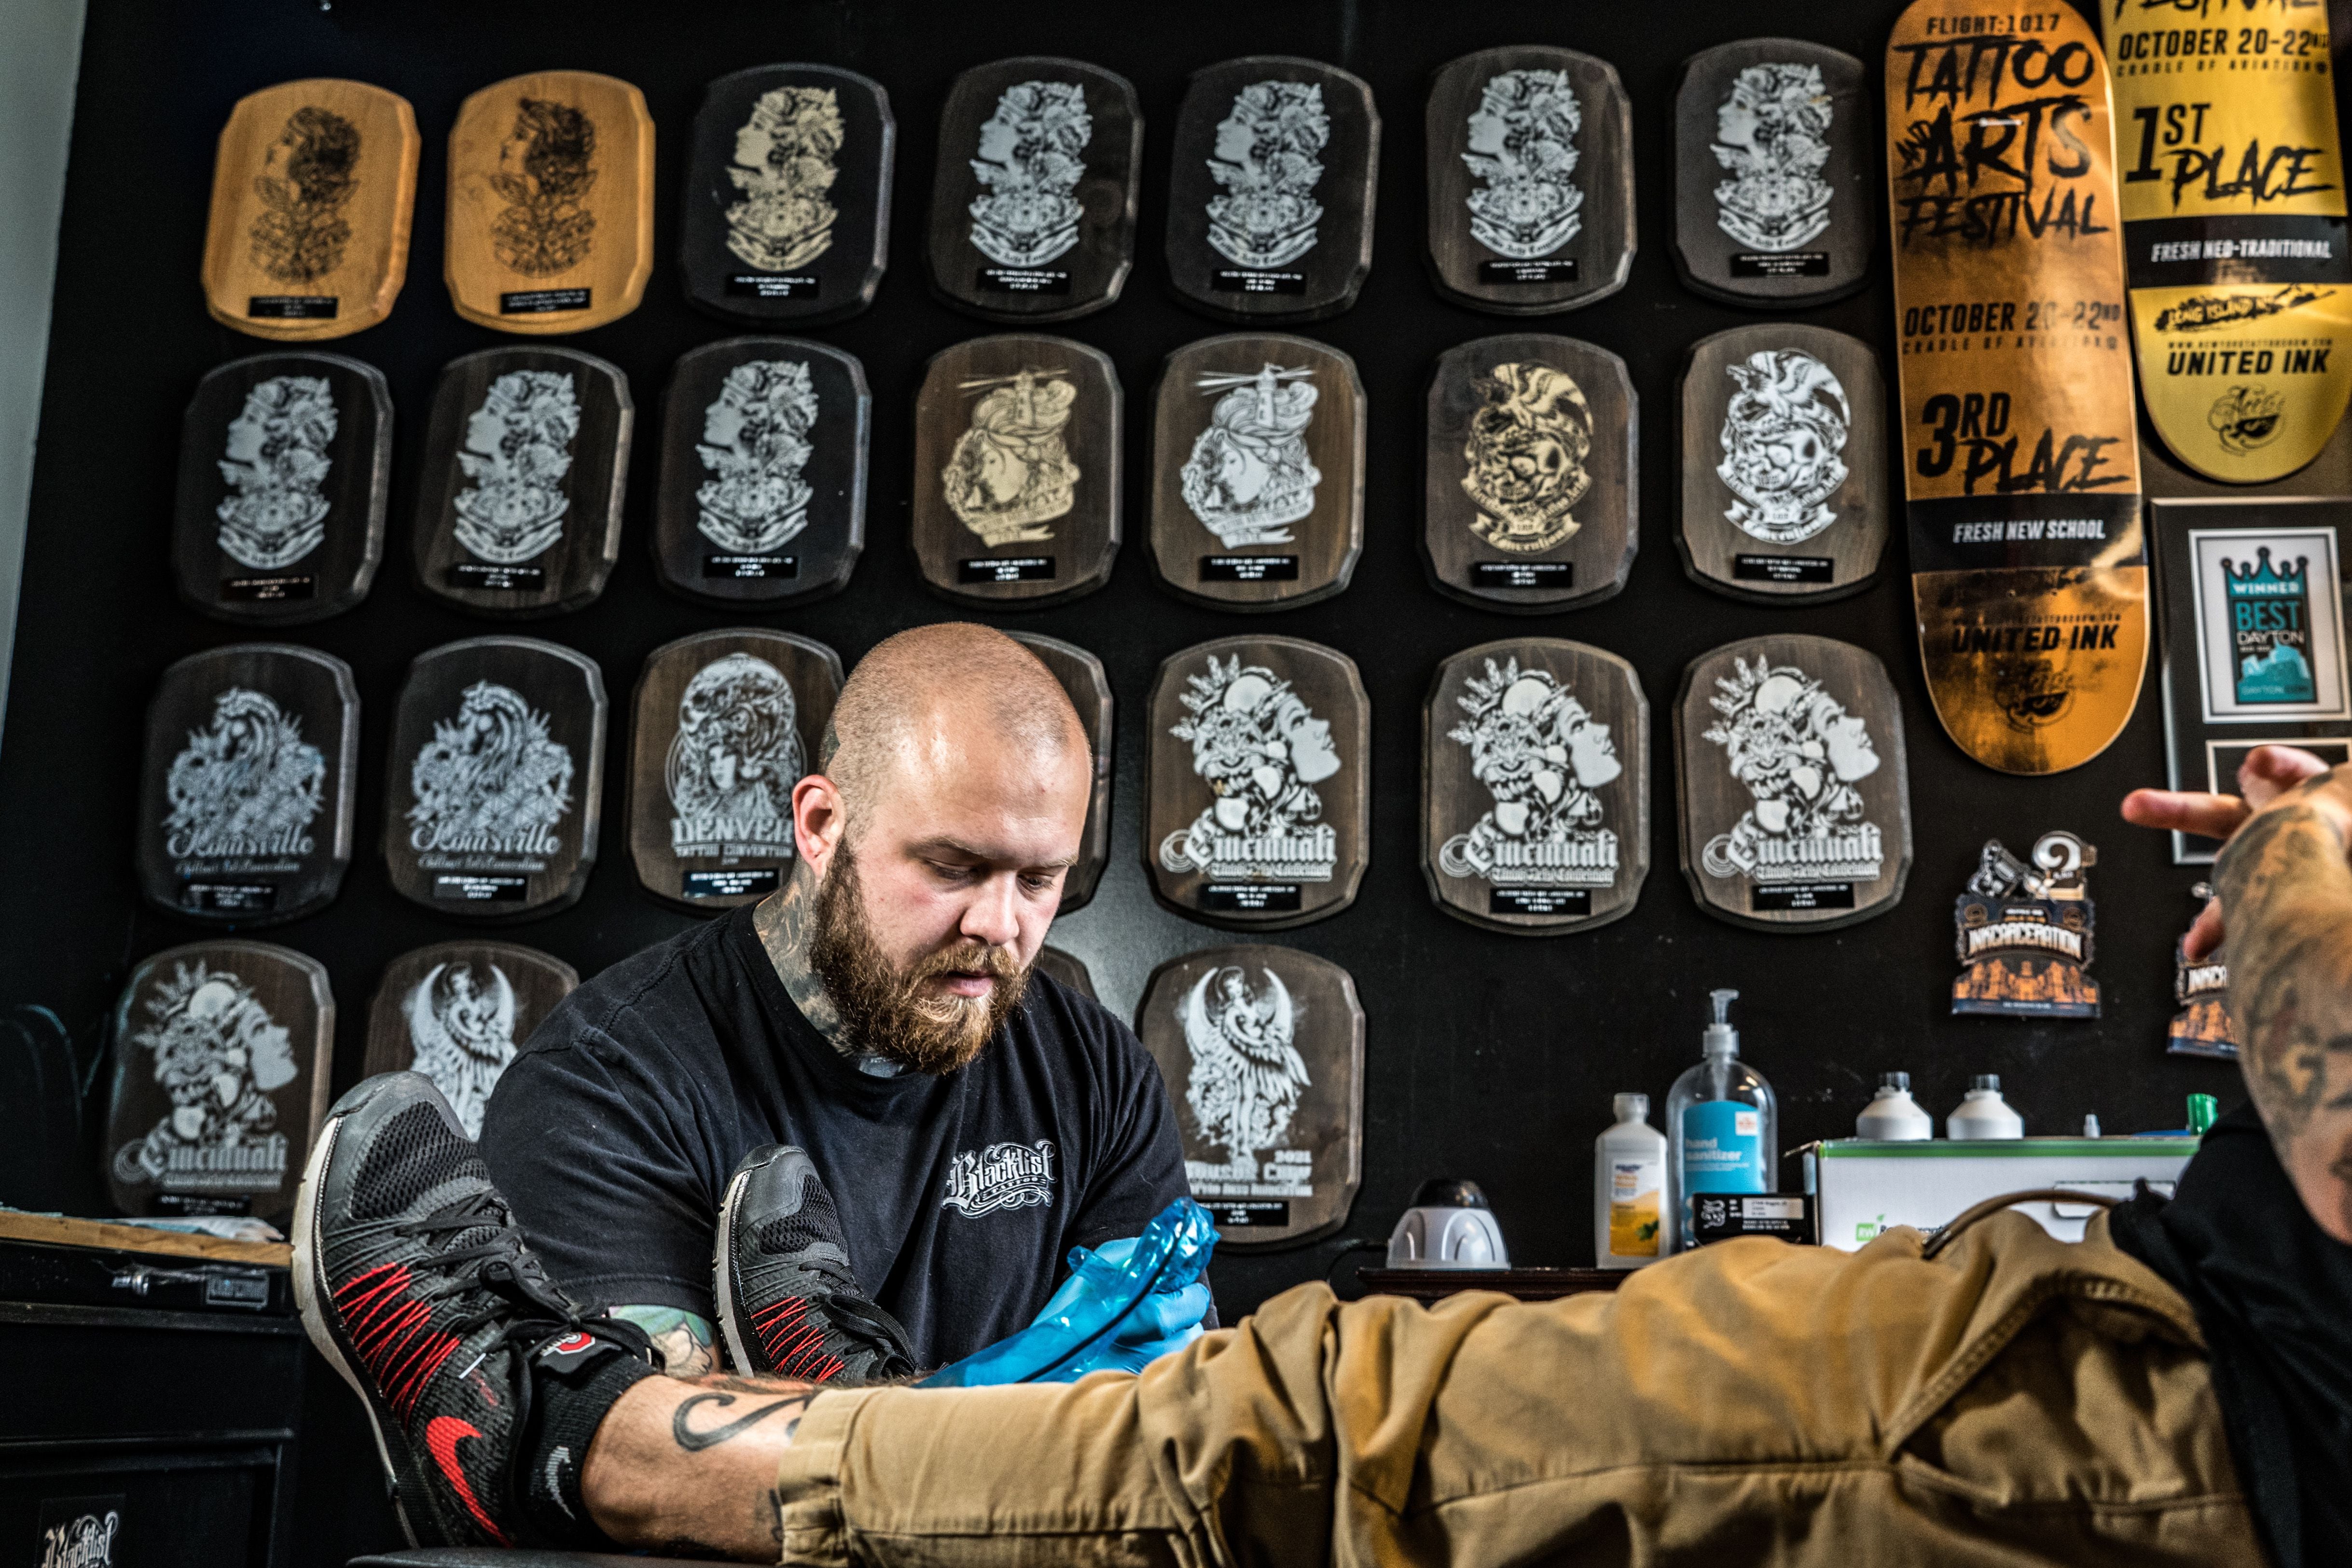 Best of Dayton: Meet Best Tattoo Artist Caleb Neff, who enjoys sharing his  passion in 'mecca of tattooing'